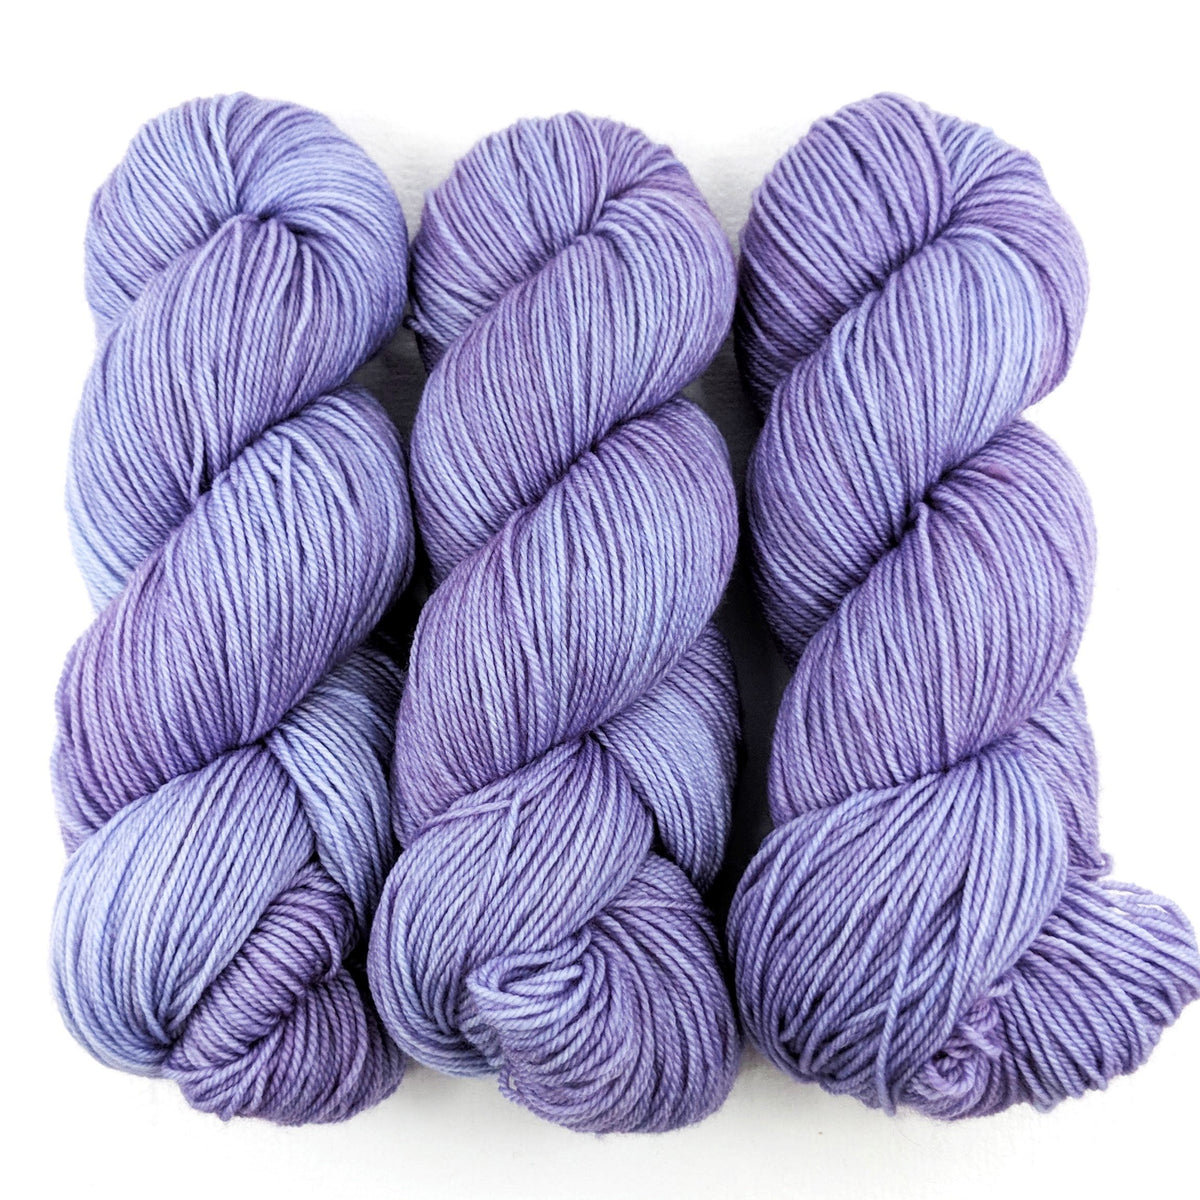 English Lavender - Revival Worsted - Dyed Stock